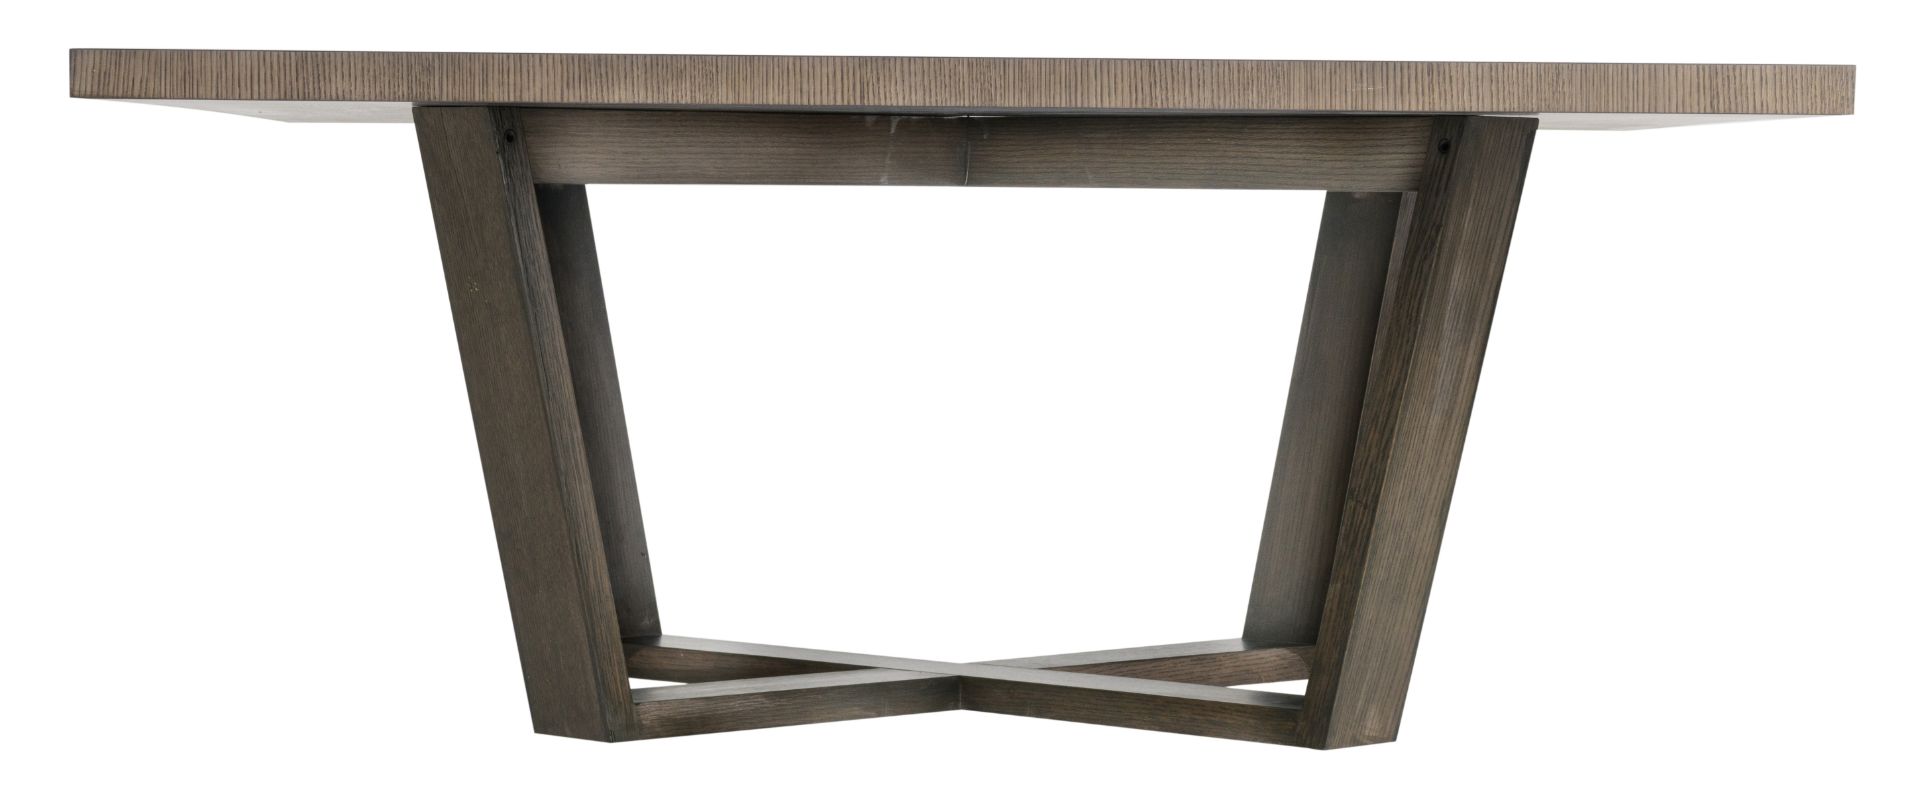 A square 'Xilos' dining table, by Antonio Citterio for B&B Italia, H 178 - W 73 cm - Image 3 of 13